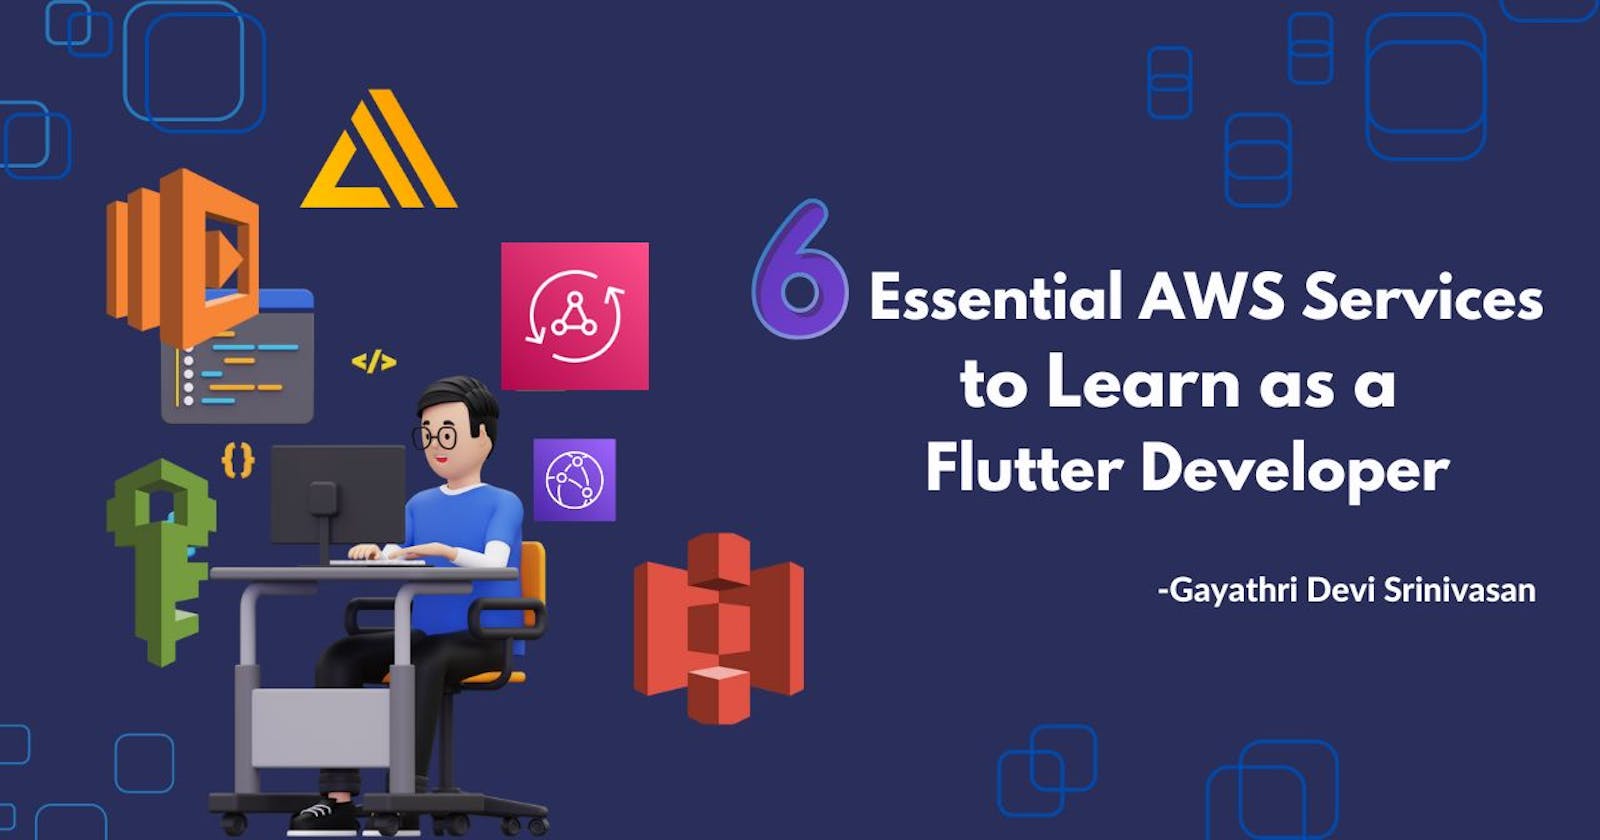 Six Essential AWS Services to Learn as a Flutter Developer